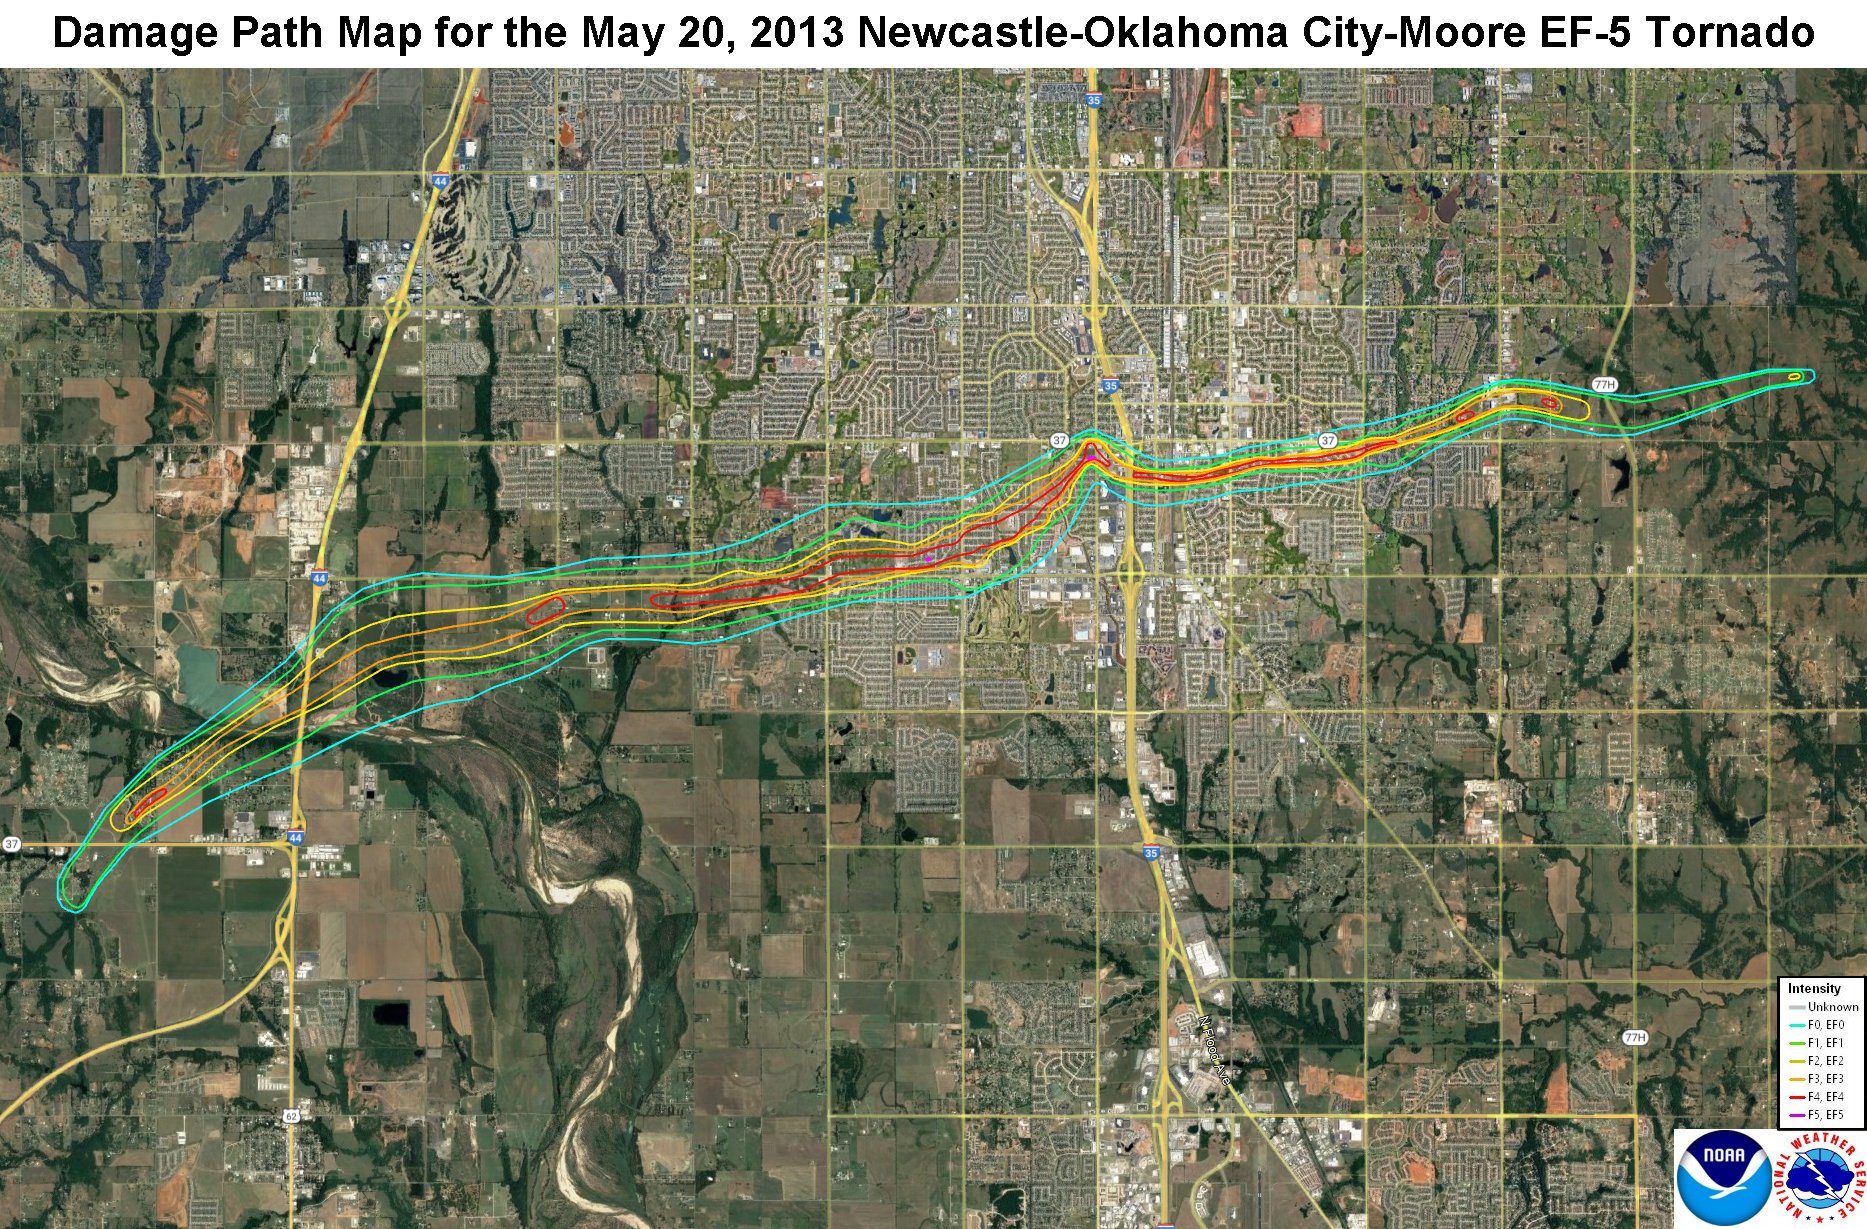 EF Scale Damage Contours of the May 20, 2013 Newcastle-South OKC-Moore EF-5 Tornado